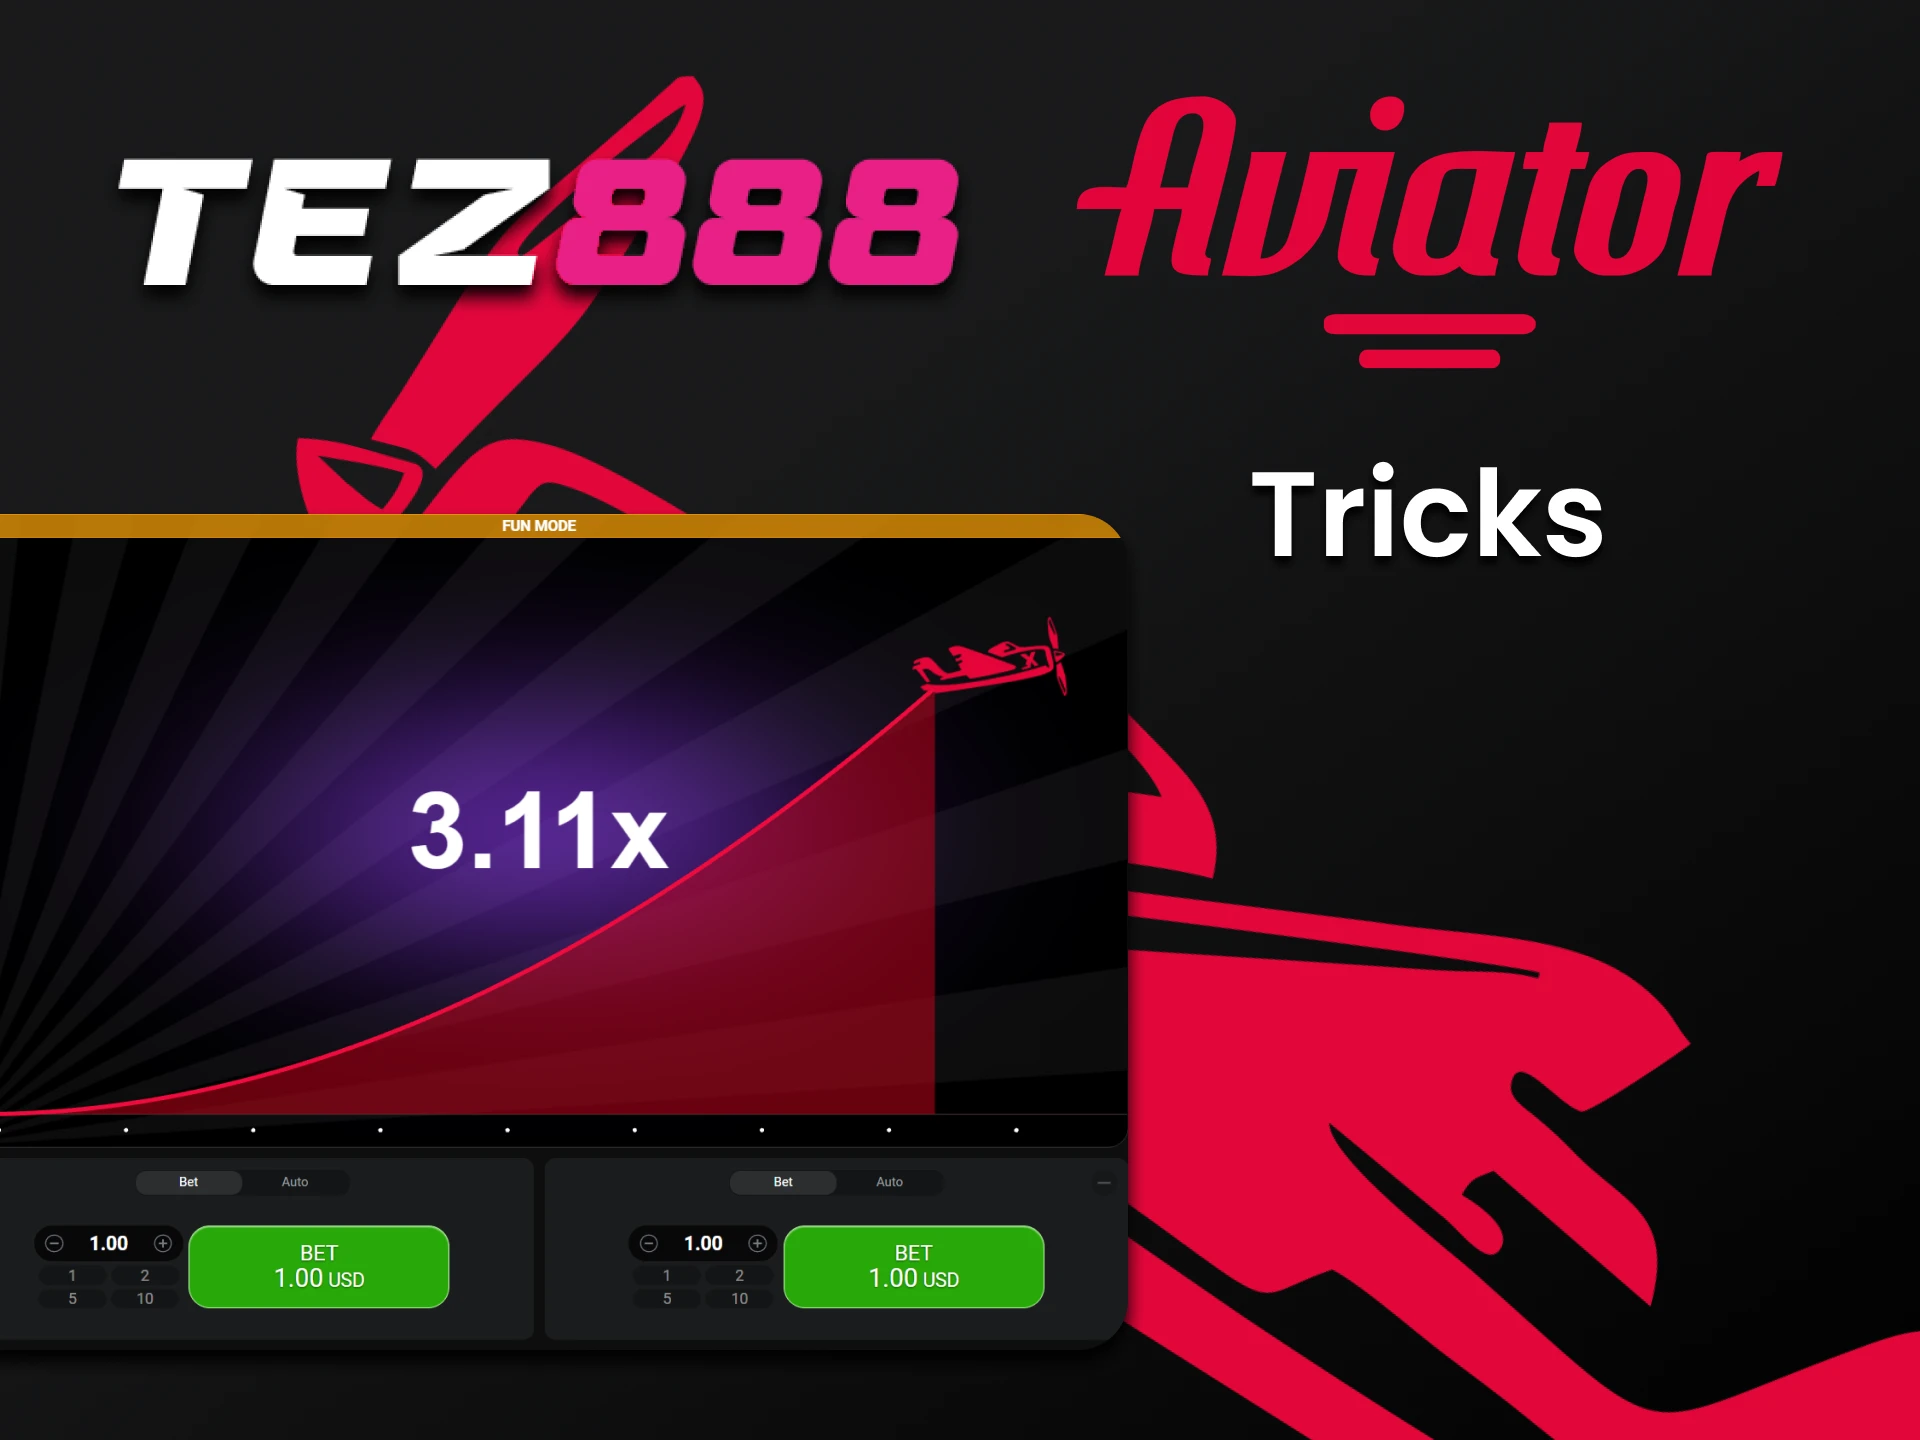 Learn different tricks in the Aviator game on Tez888.